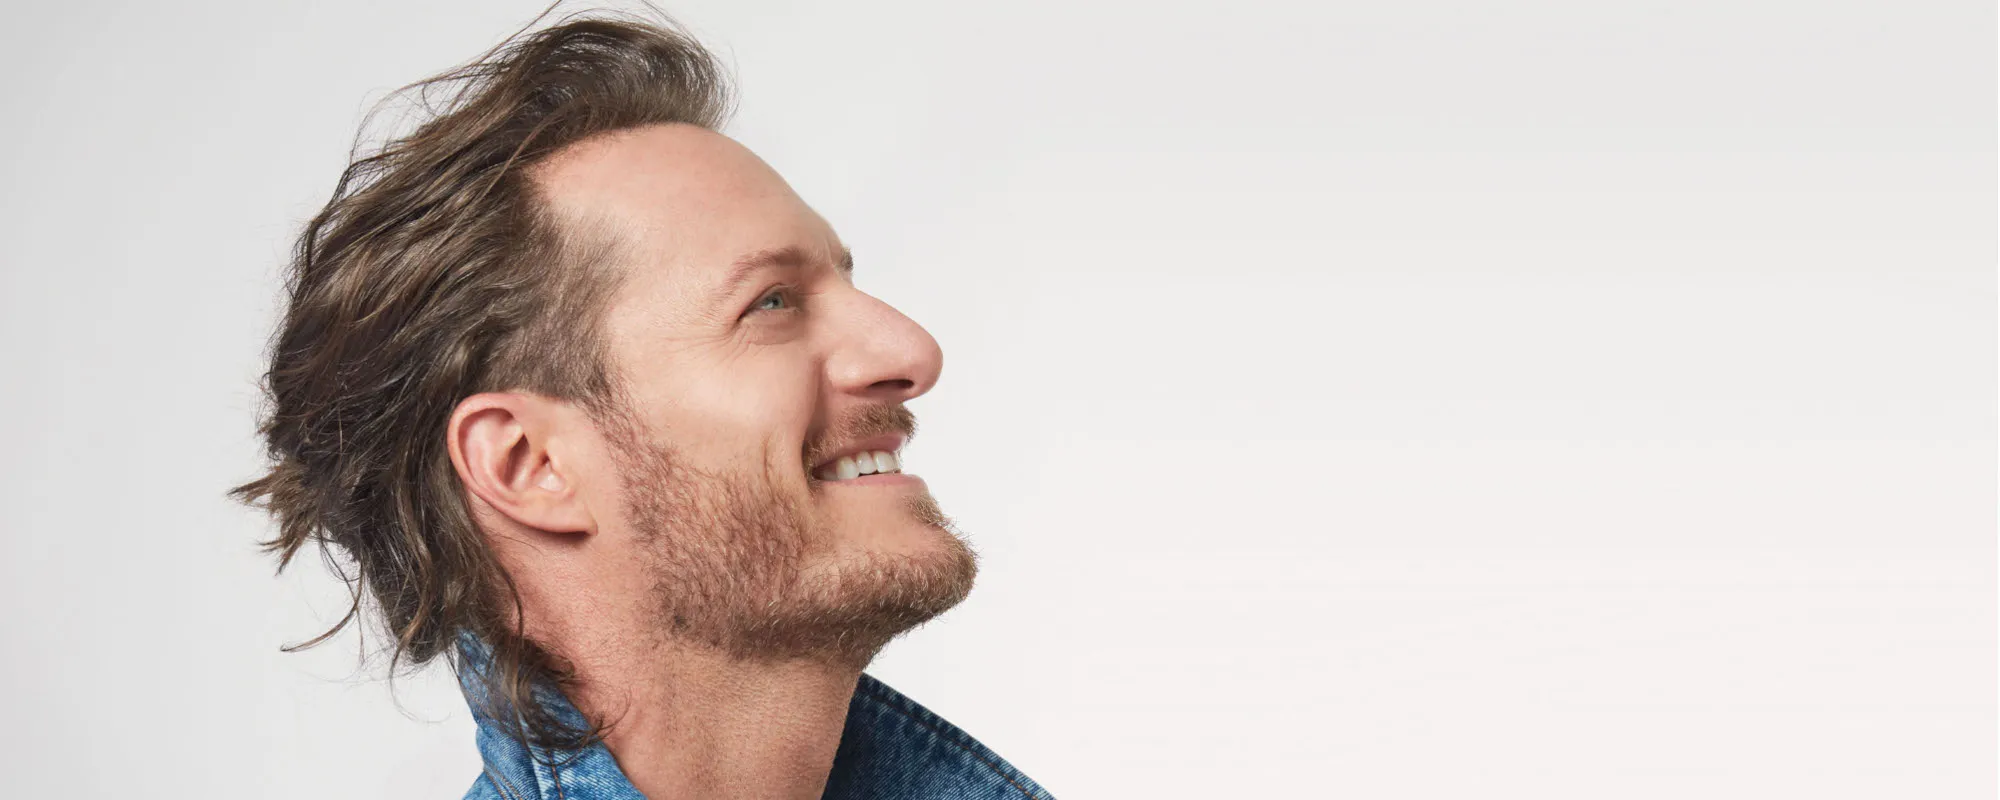 Tyler Hubbard Returns to His Roots With New Song, “Way Home”